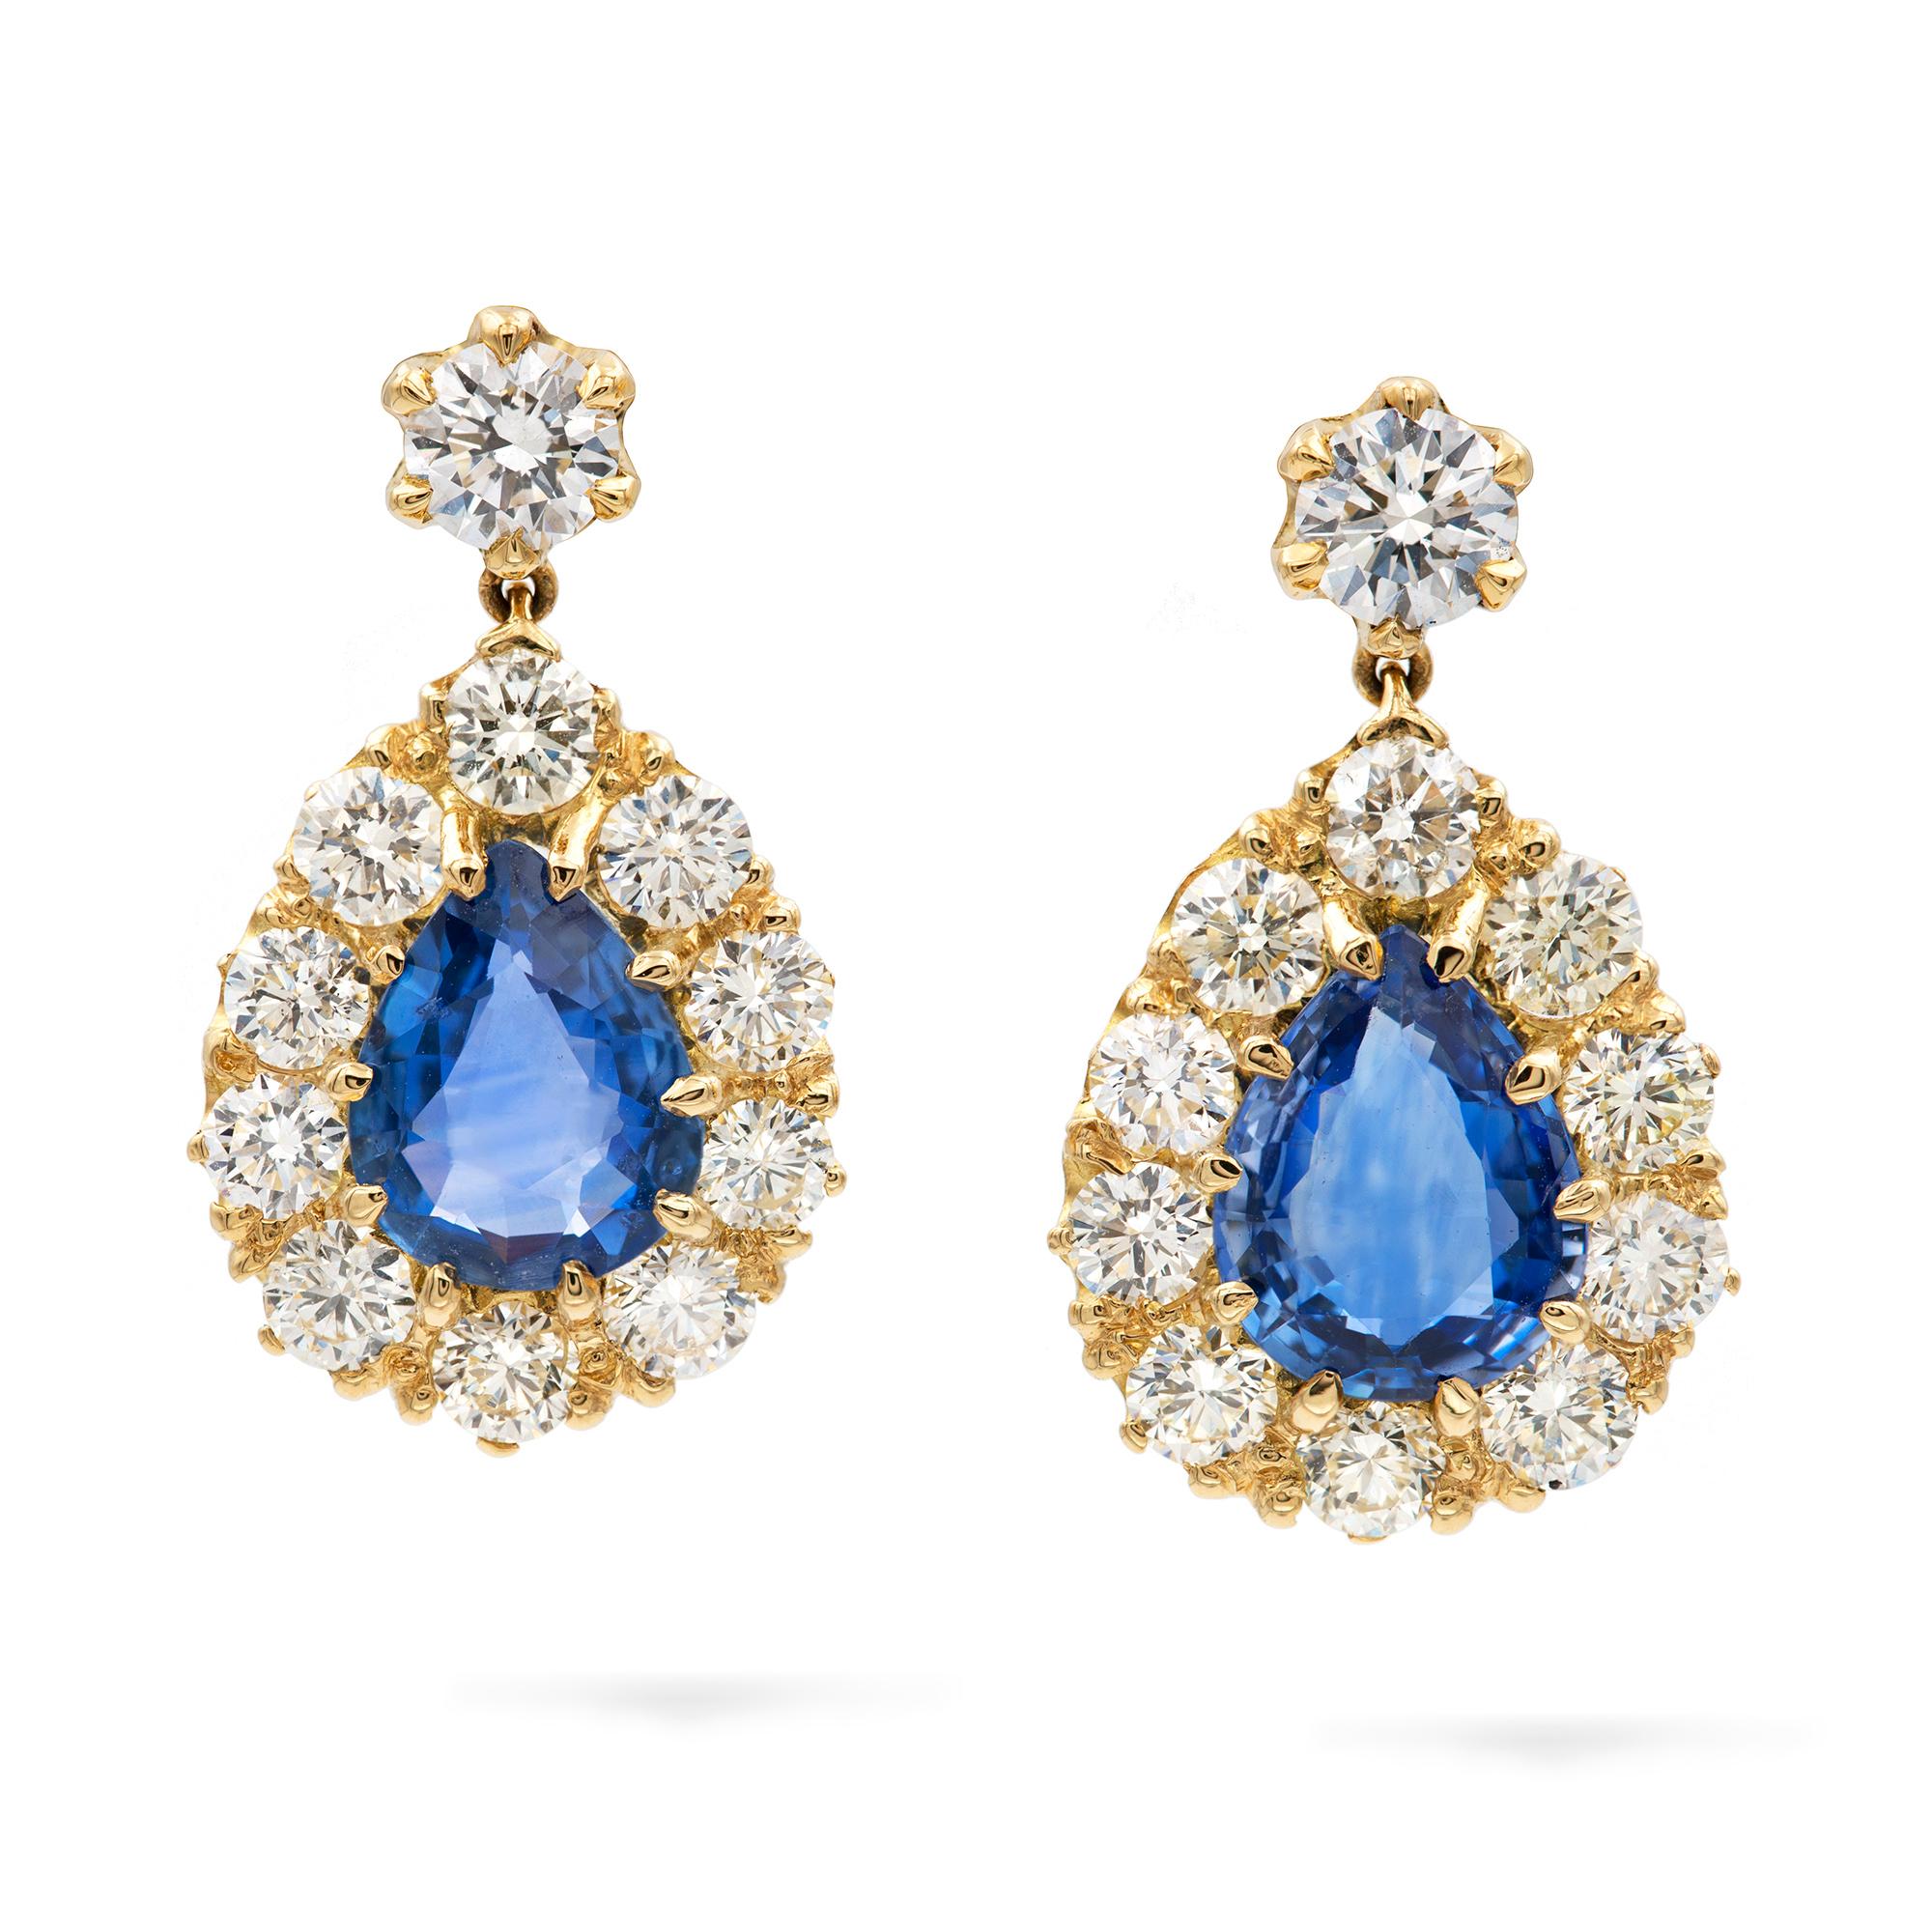 Contemporary Pair of Sapphire and Diamond Drop Earring